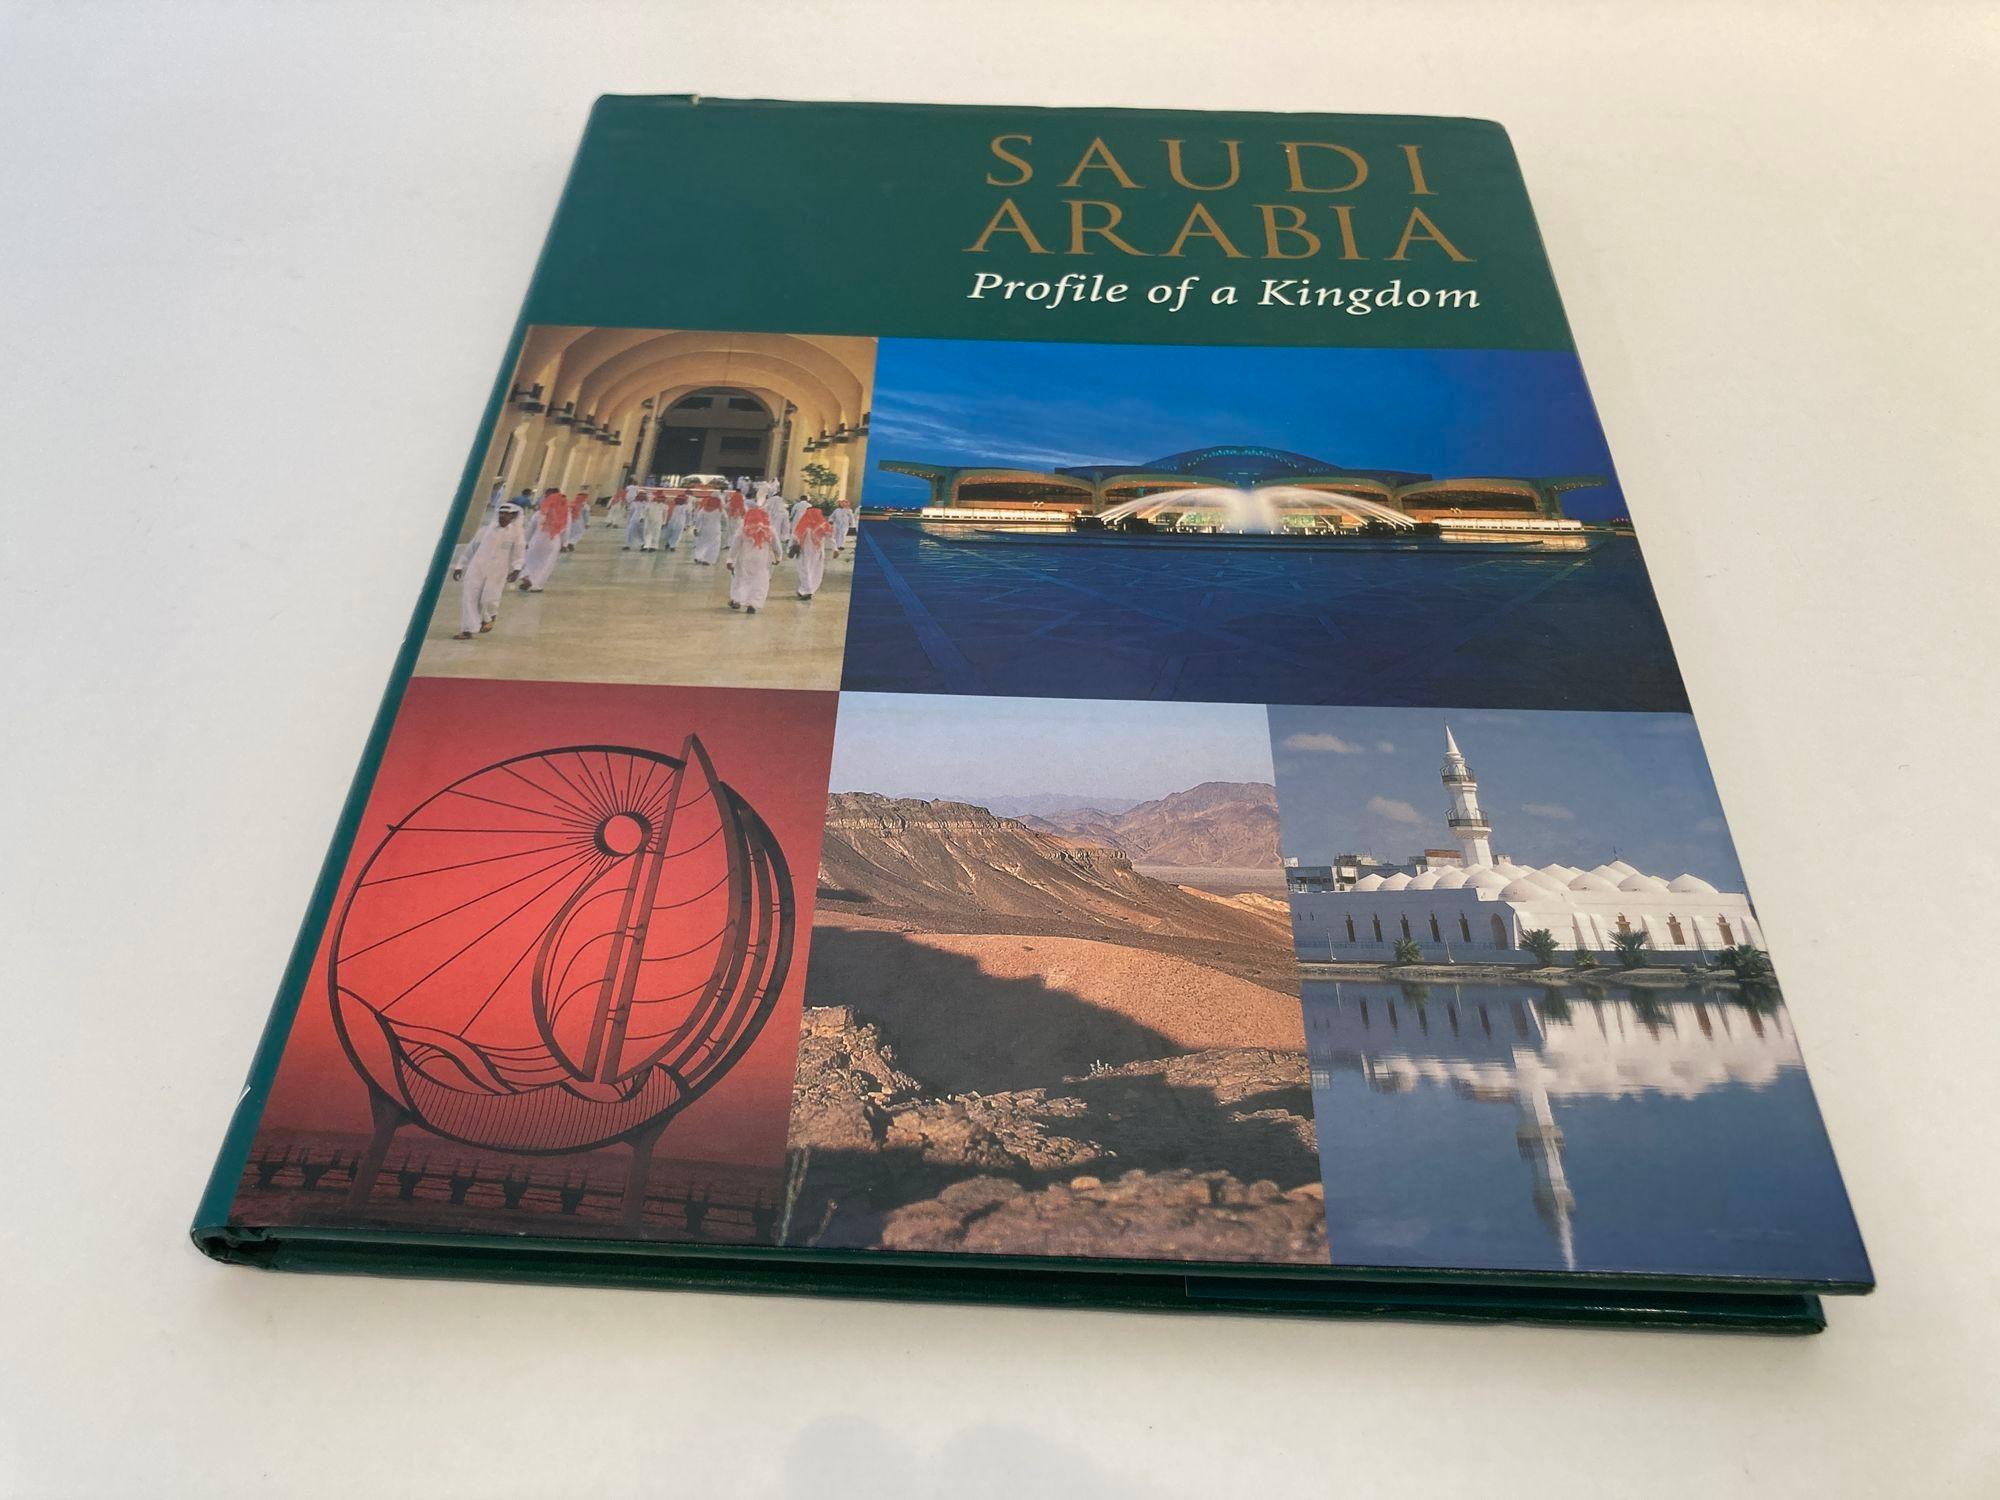 Saudi Arabia, Profile of a Kingdom Book by Claude Avézard and Jan Dobson.
Over-sized hardcover book with dust jacket titled SAUDI ARABIA: Profile of a Kingdom.
Motivate Publishing, 1999 - Saudi Arabia - 124 pages.
This text introduces the many